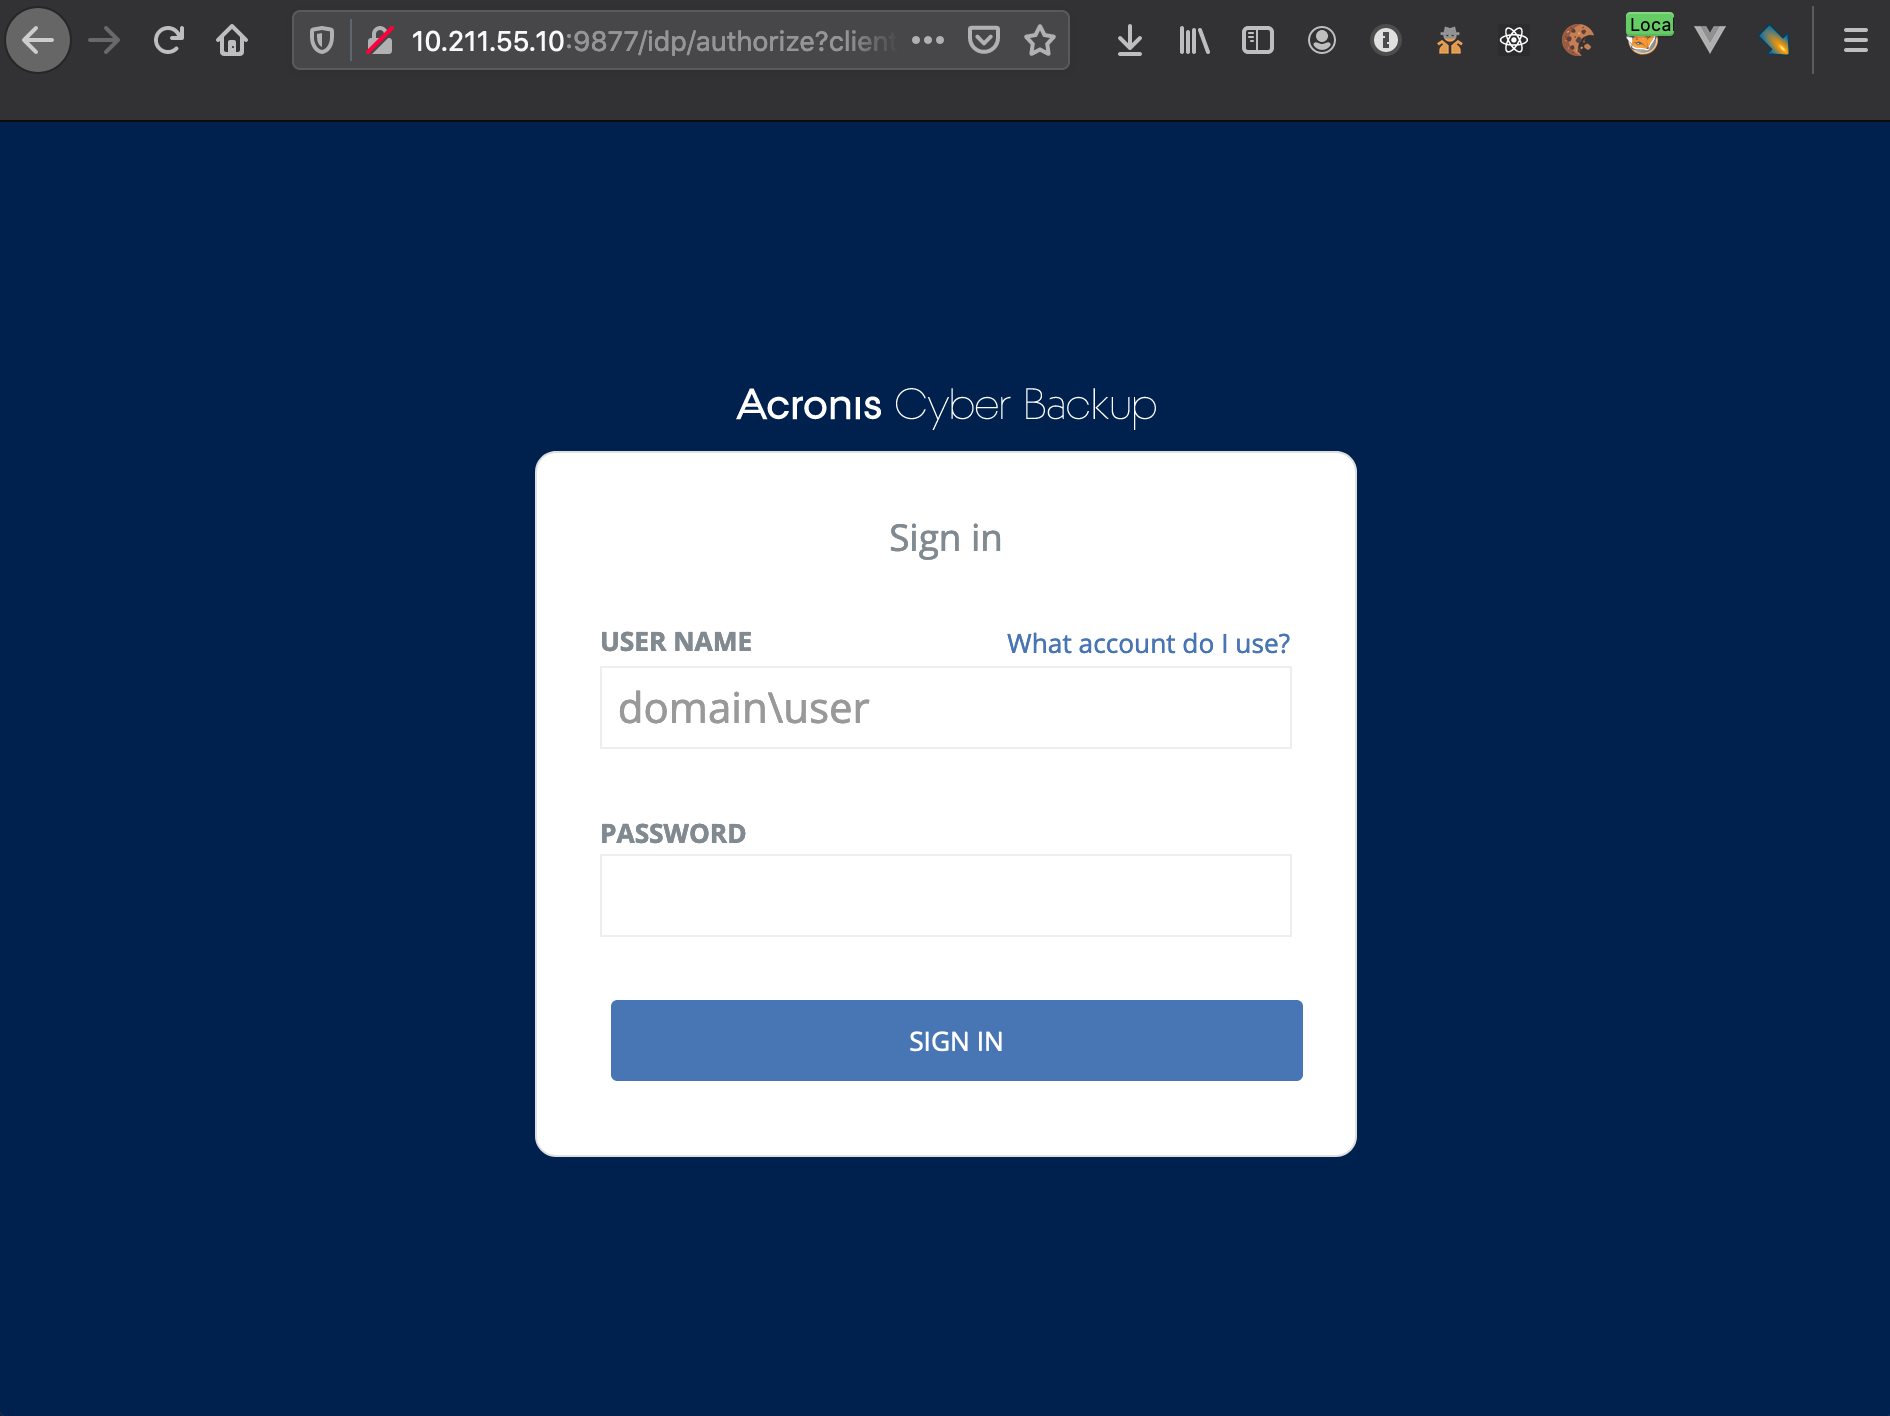 CVE-2020-16171: Exploiting Acronis Cyber Backup for Fun and Emails